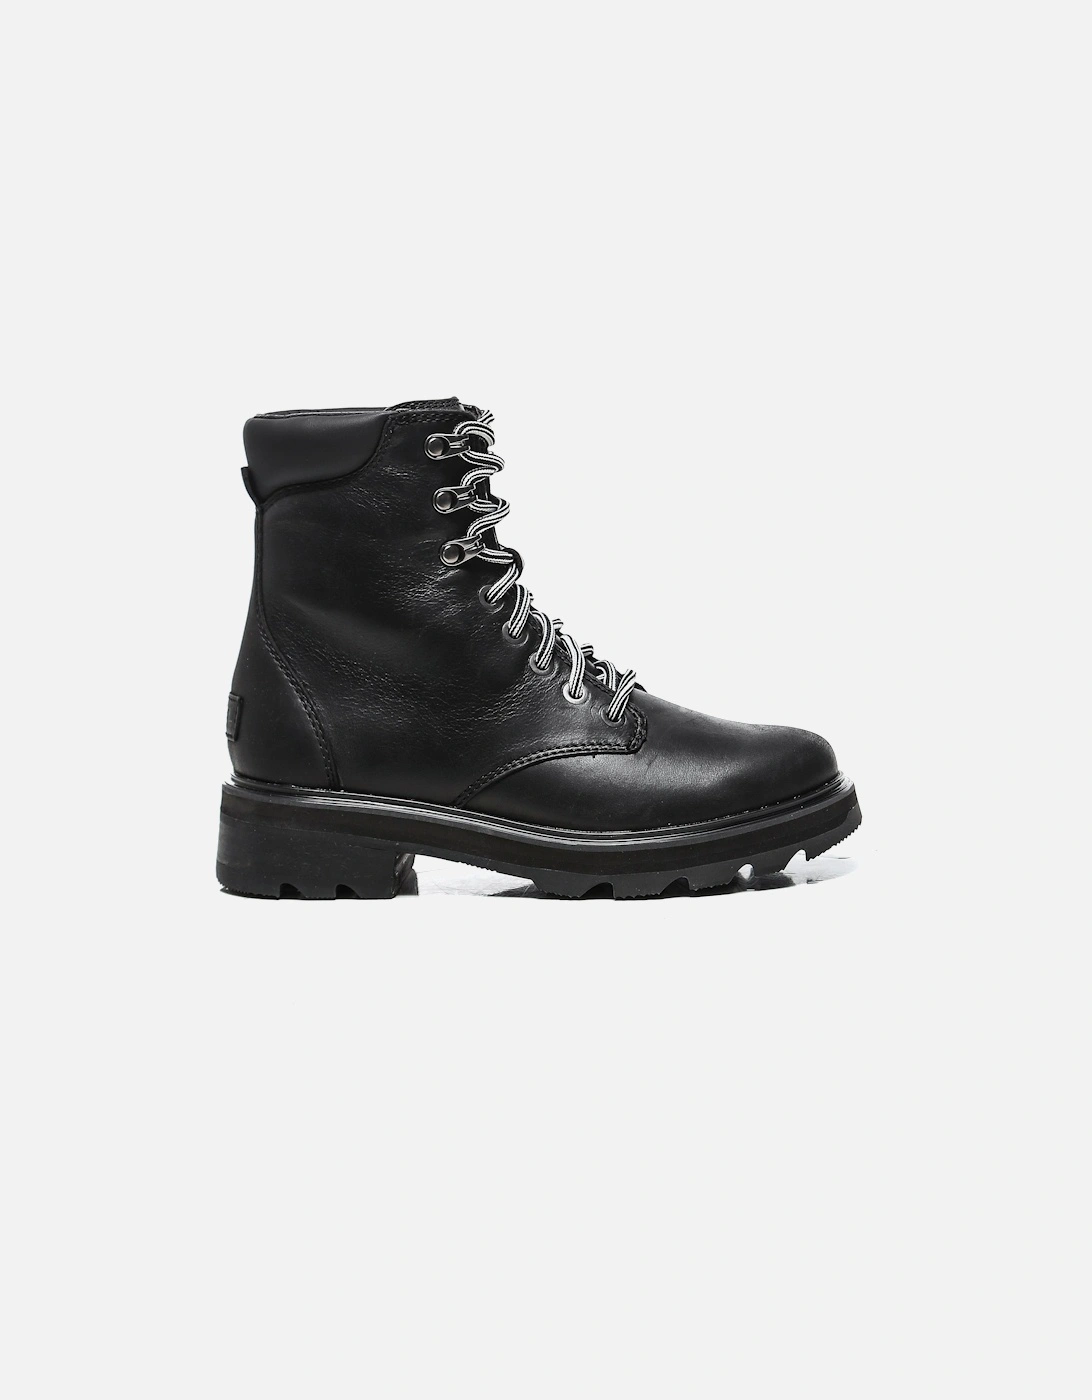 Waterproof Leather Lennox Boots